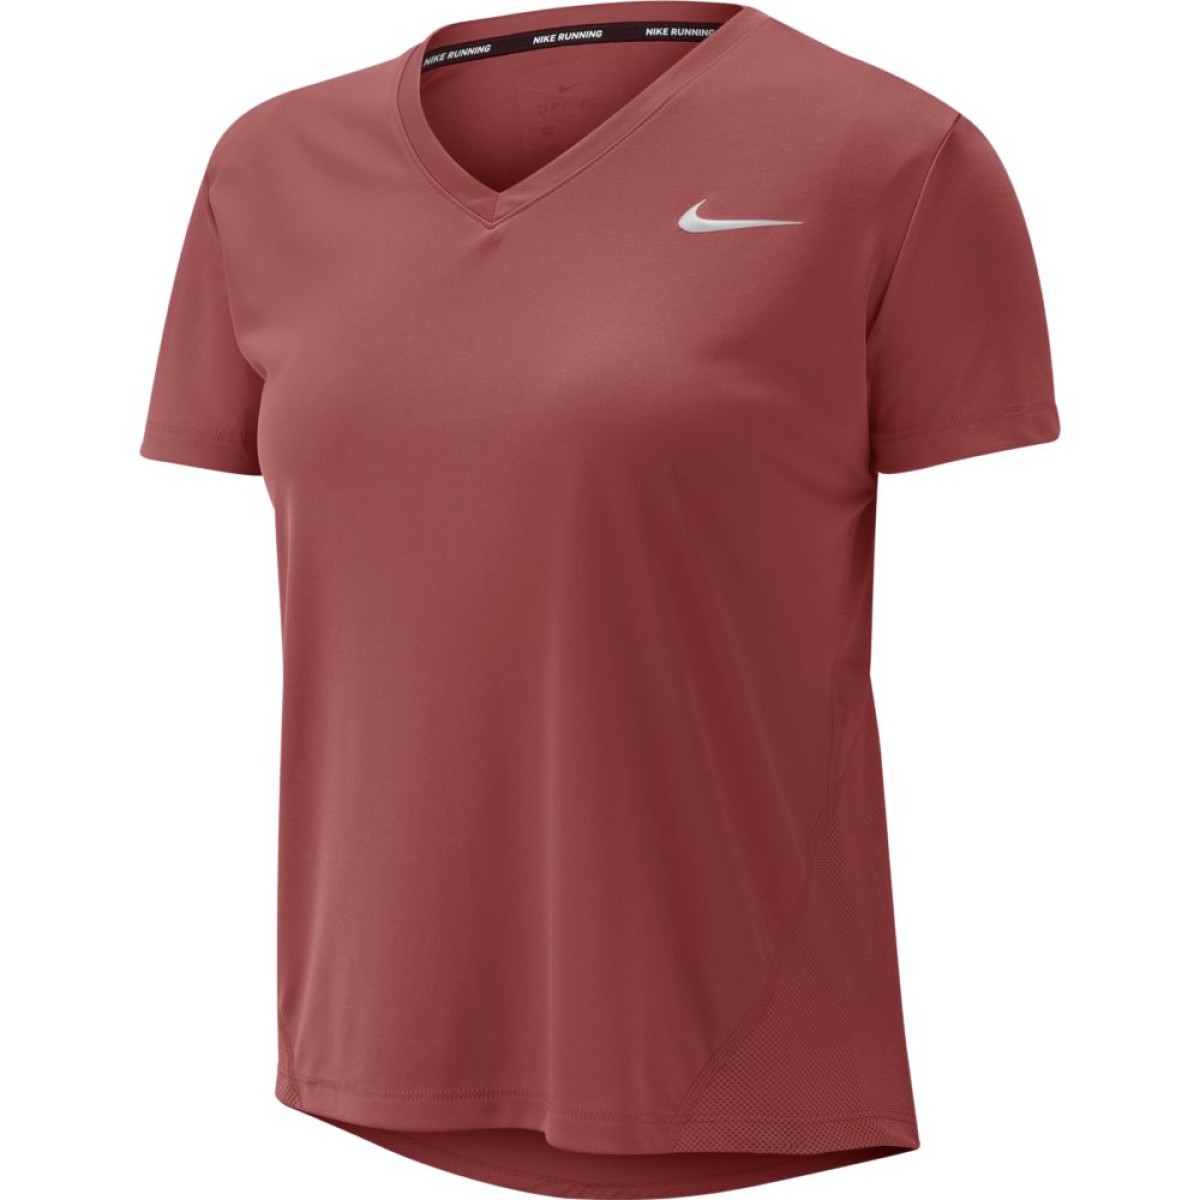 Nike Miler Women's V-Neck Running Top Kick your run into high gear with ...